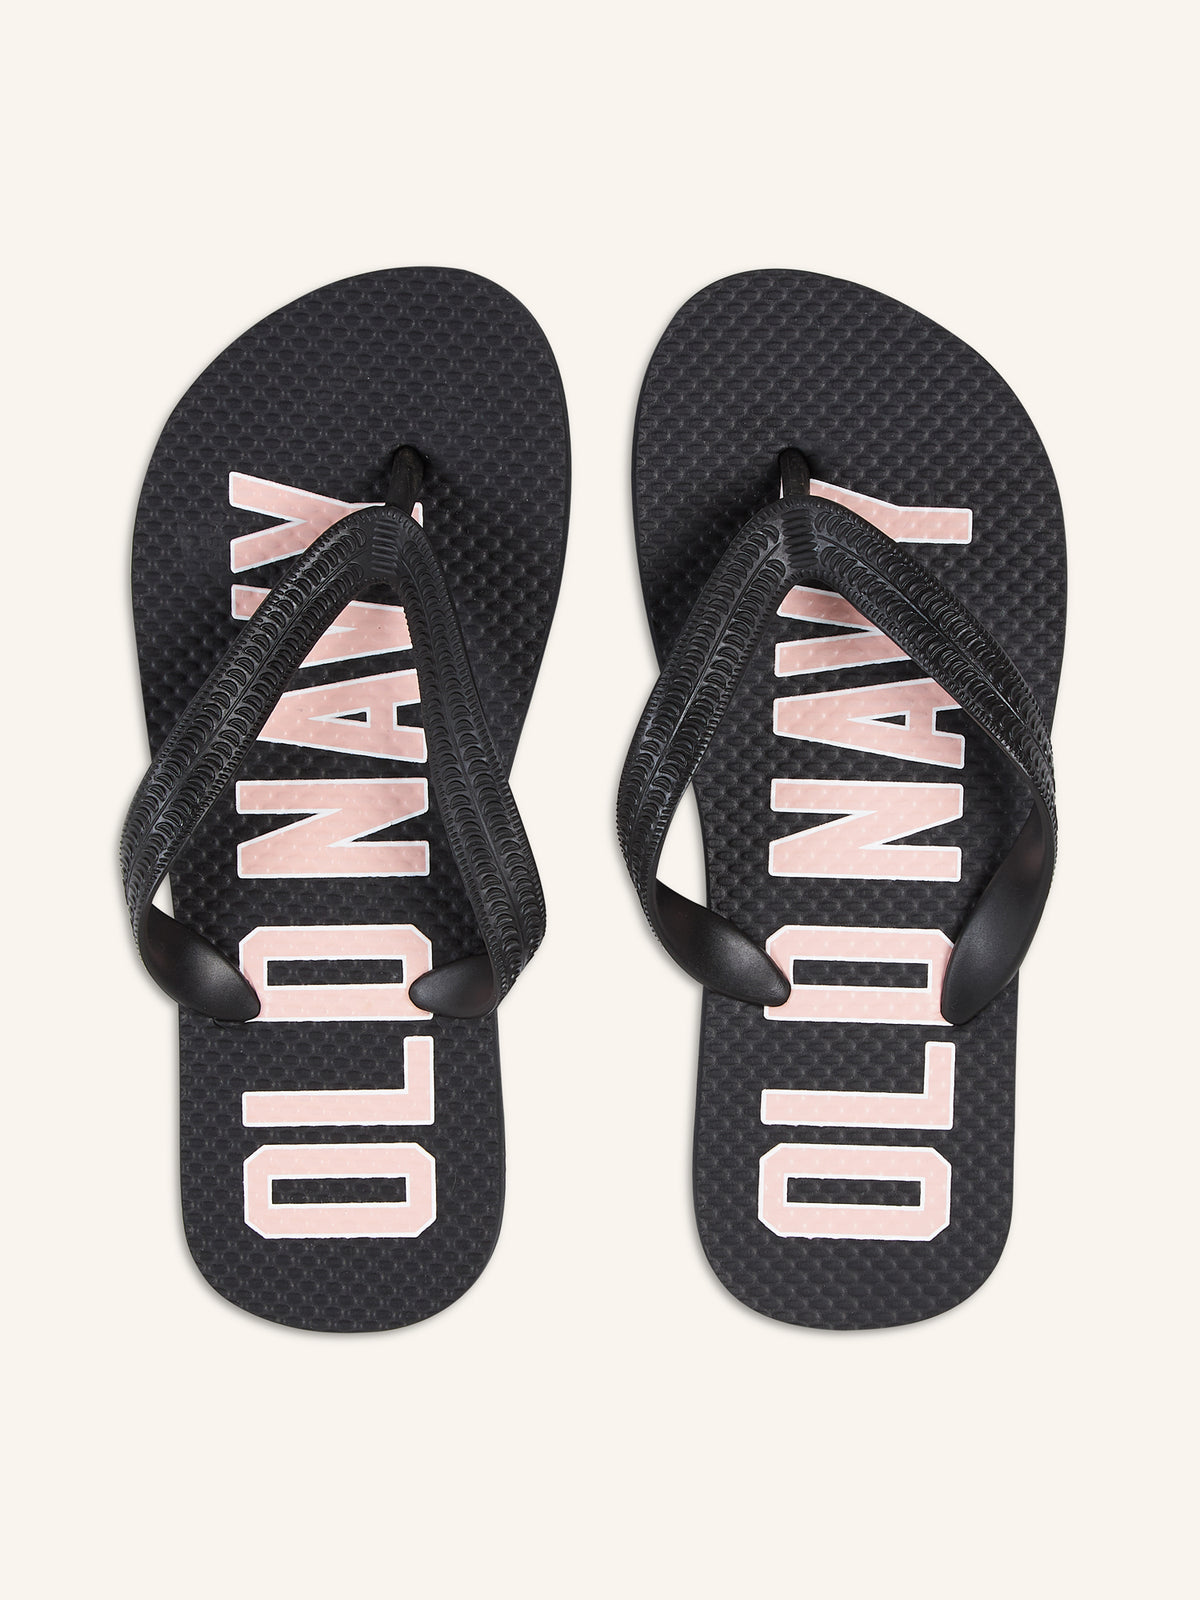 Plant-Based Classic Flip-Flop Sandals for Kids - Old Navy Philippines